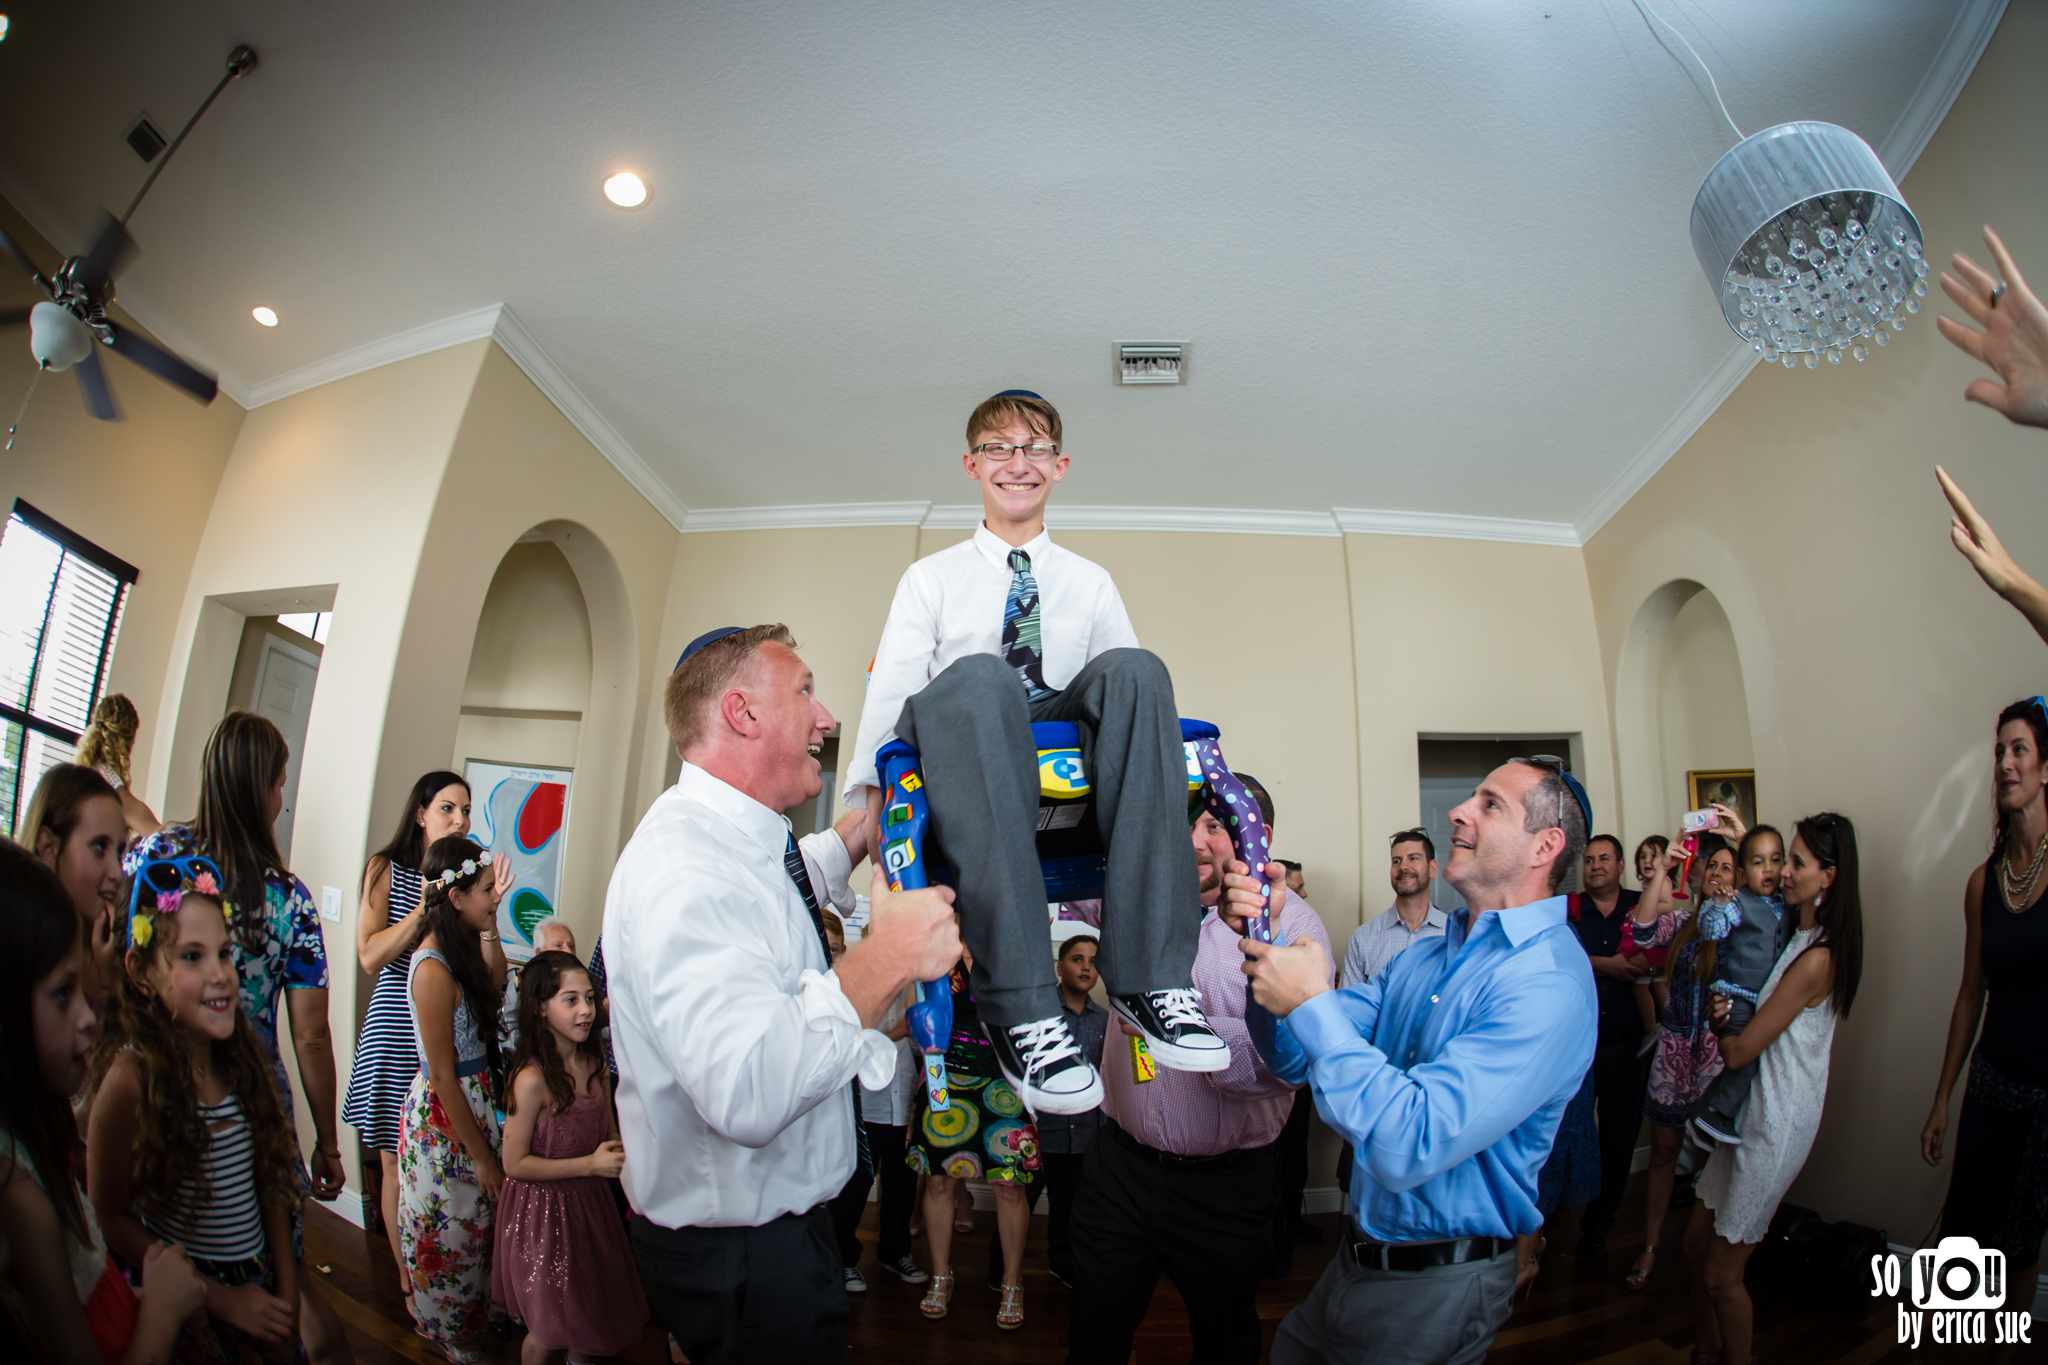 bar-mitzvah-photography-ft-lauderdale-so-you-by-erica-sue-0792.jpg